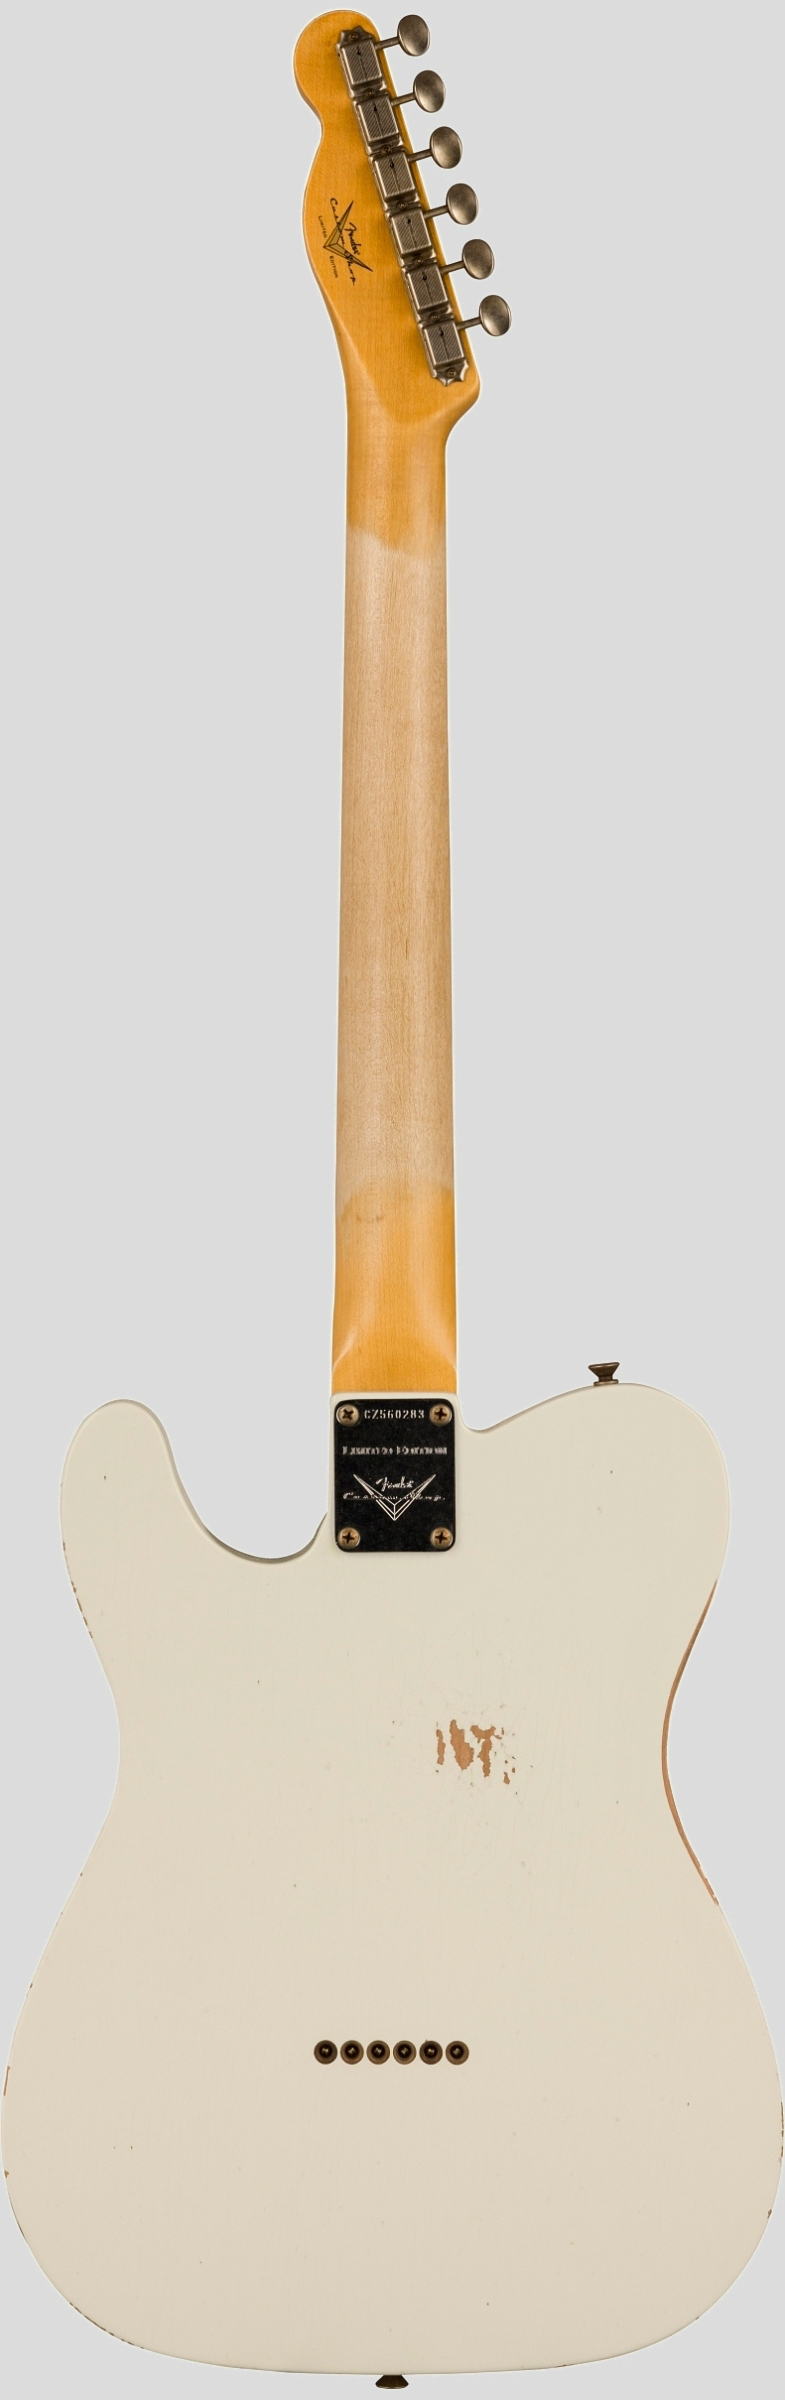 Fender Custom Shop Limited Edition 61 Telecaster Aged Olympic White Relic 2